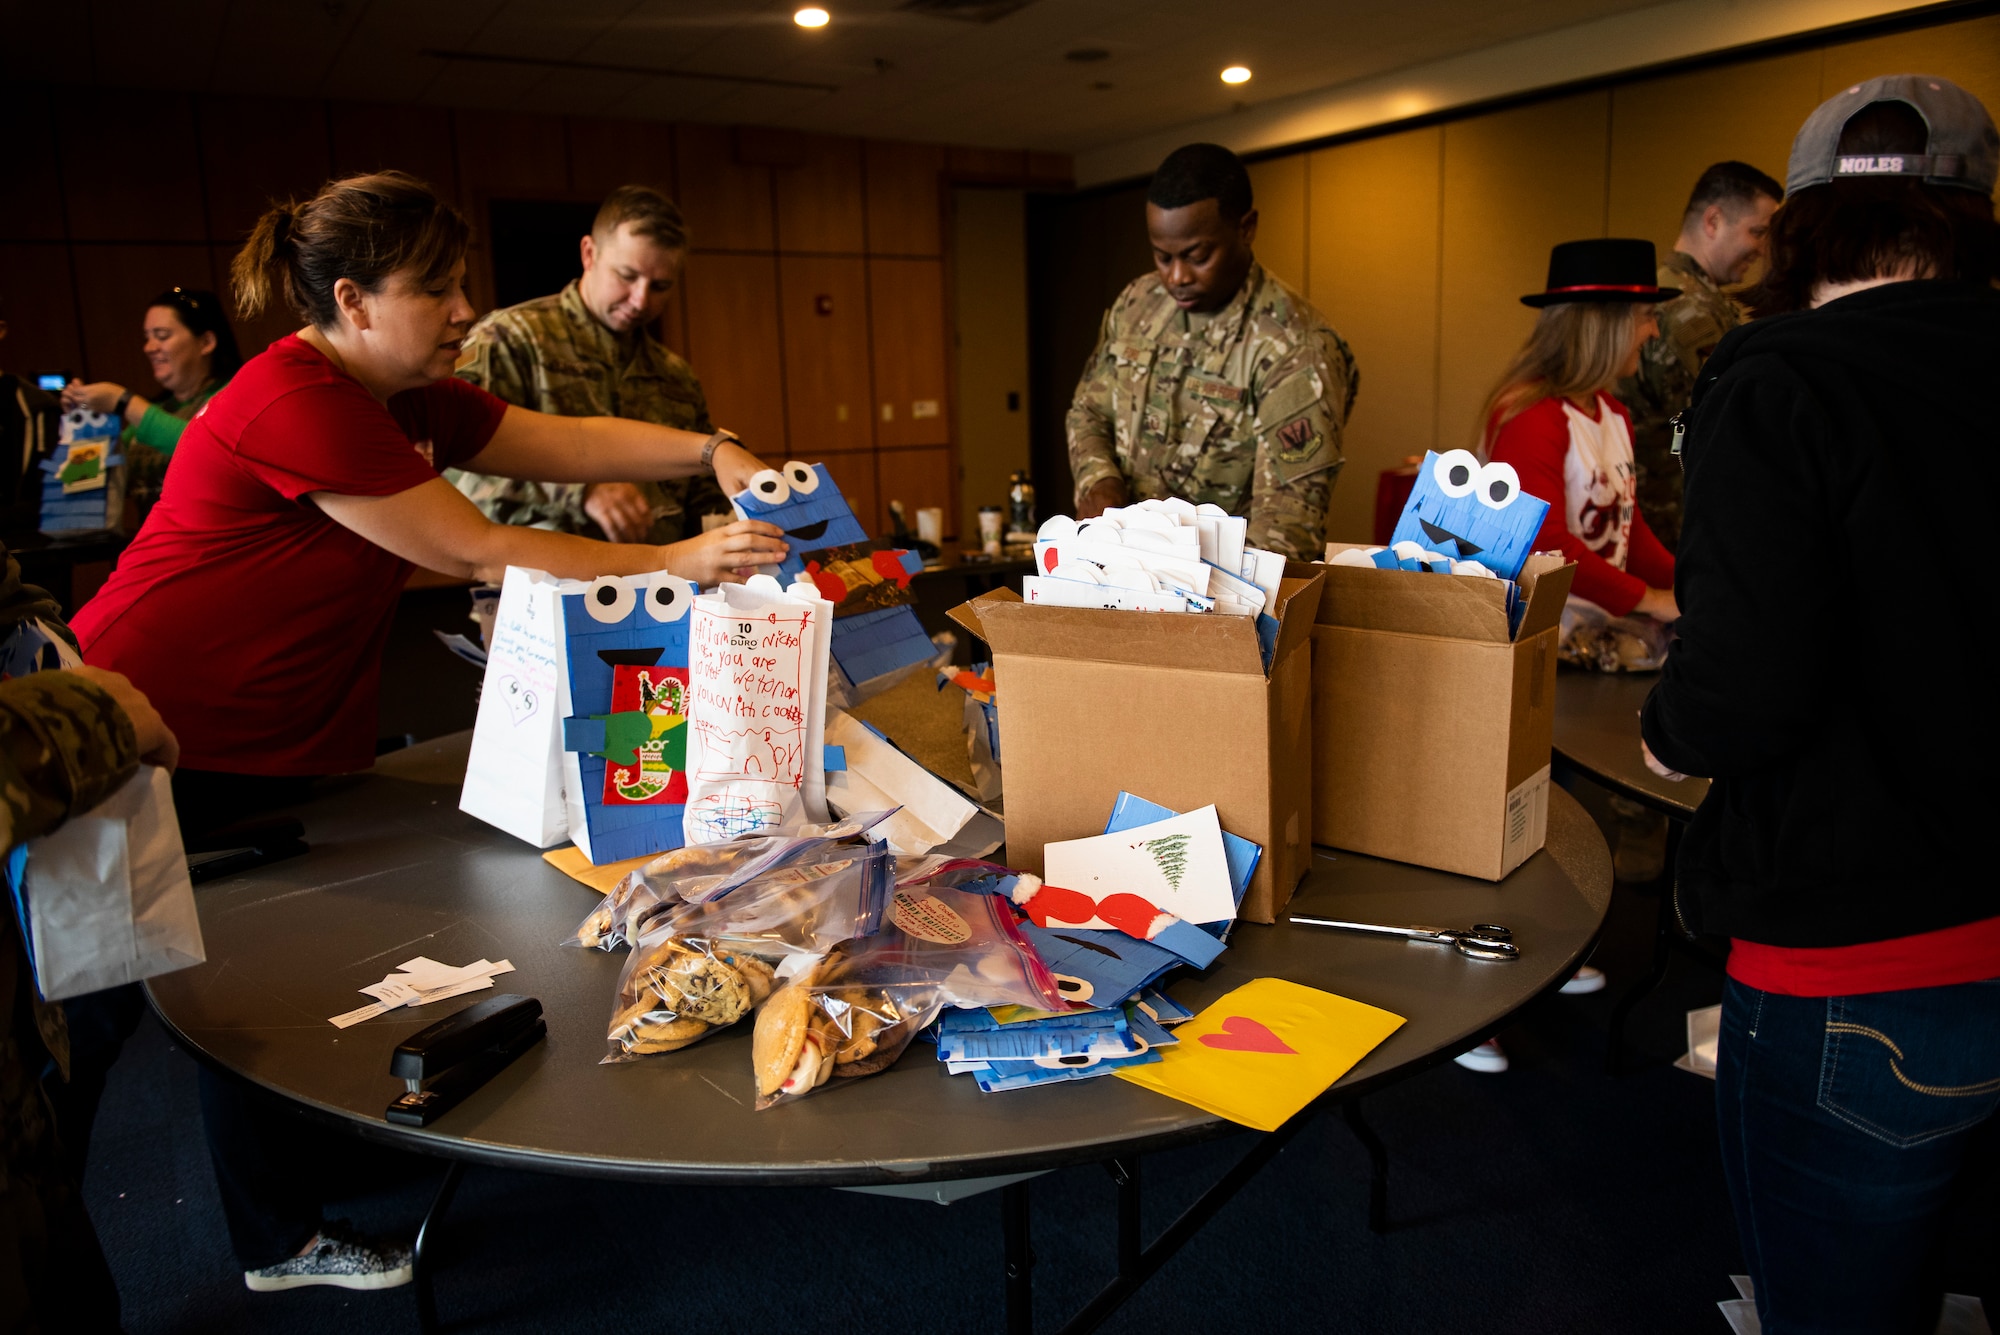 Members of the Tyndall Spouses Club and Tyndall First Sergeants assemble goodie bags during a Cookie Caper event, at Tyndall Air Force Base, Florida, Dec. 9, 2019.  Hundreds of donated cookies were collected and distributed to Airmen living in the on base dormitories, which were delivered in colorful bags handmade by students at Tyndall Elementary School. (U.S. Air Force photo by Staff Sgt. Magen M. Reeves)